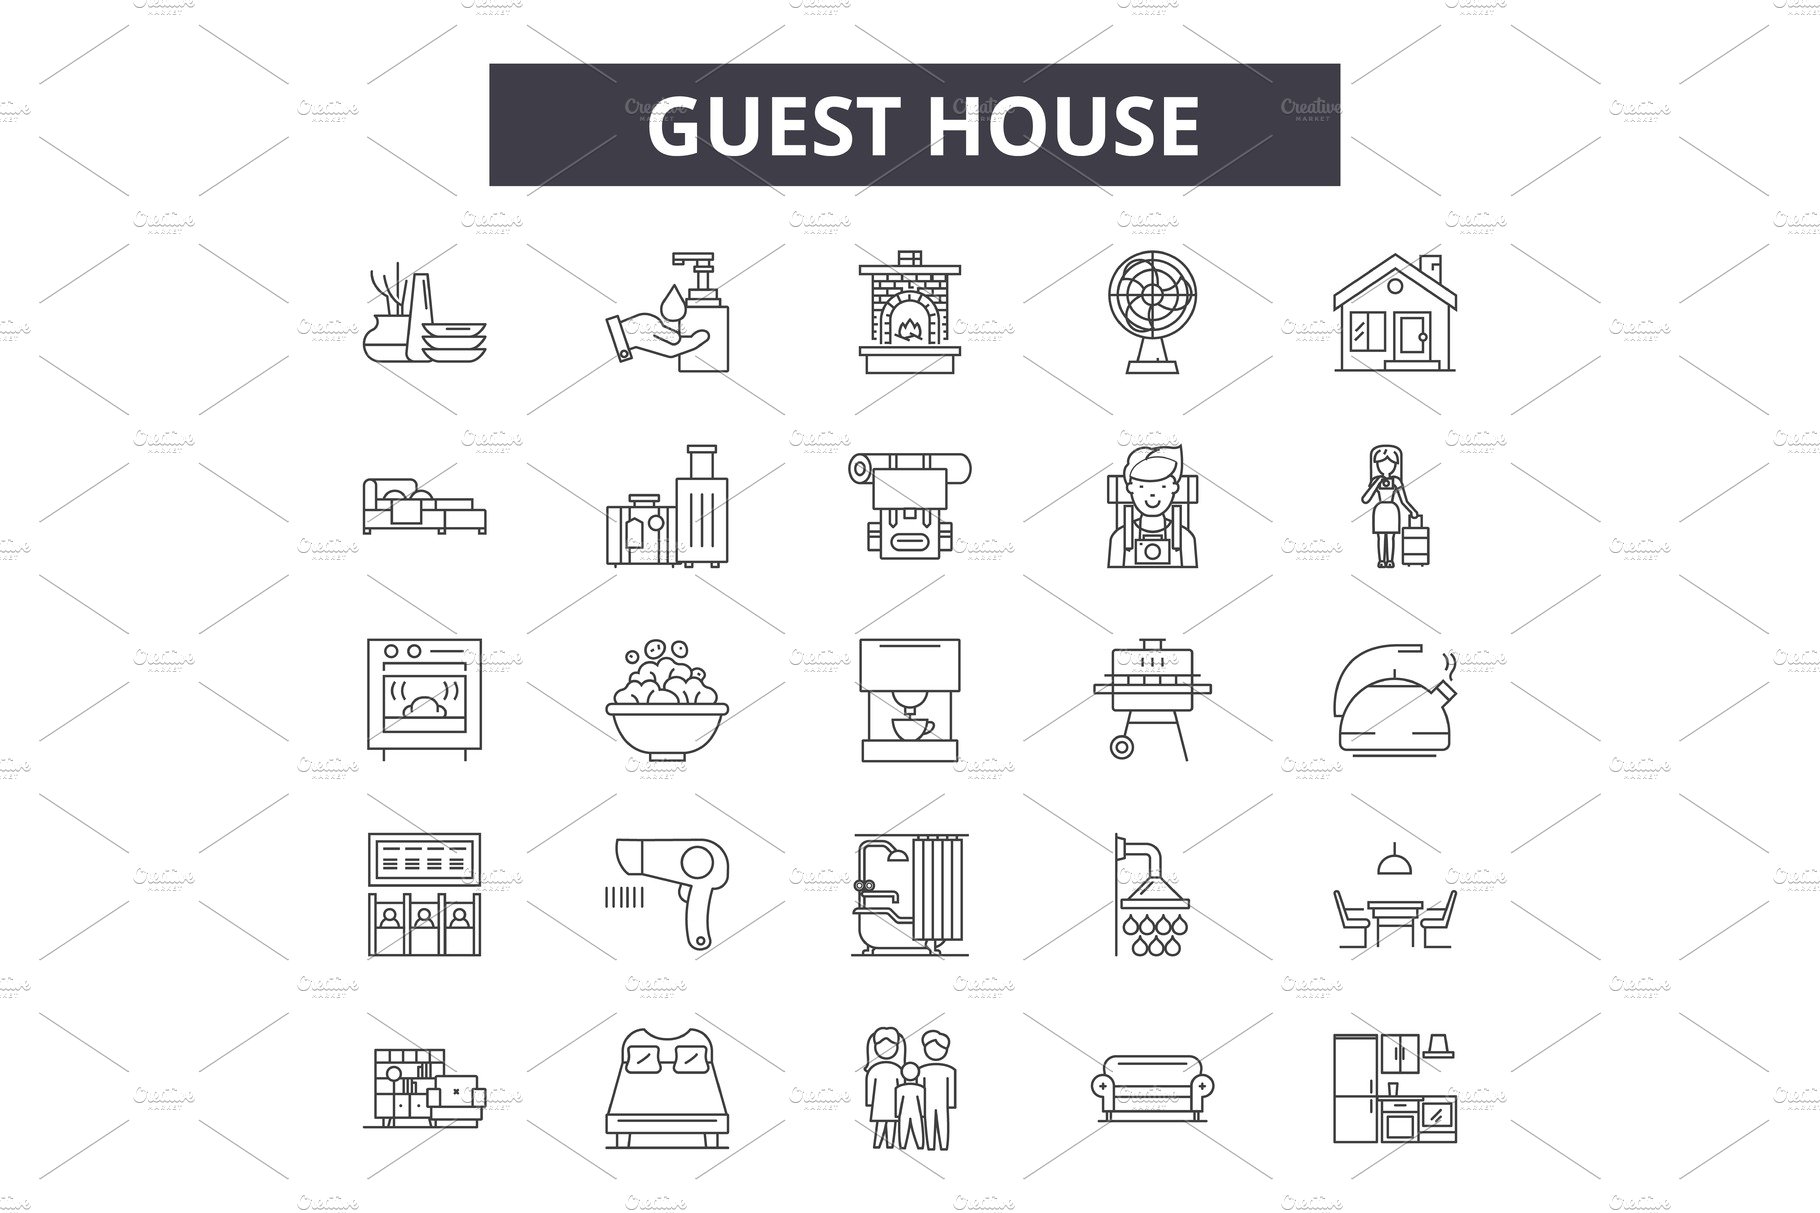 Guest hotel house line icons, signs cover image.